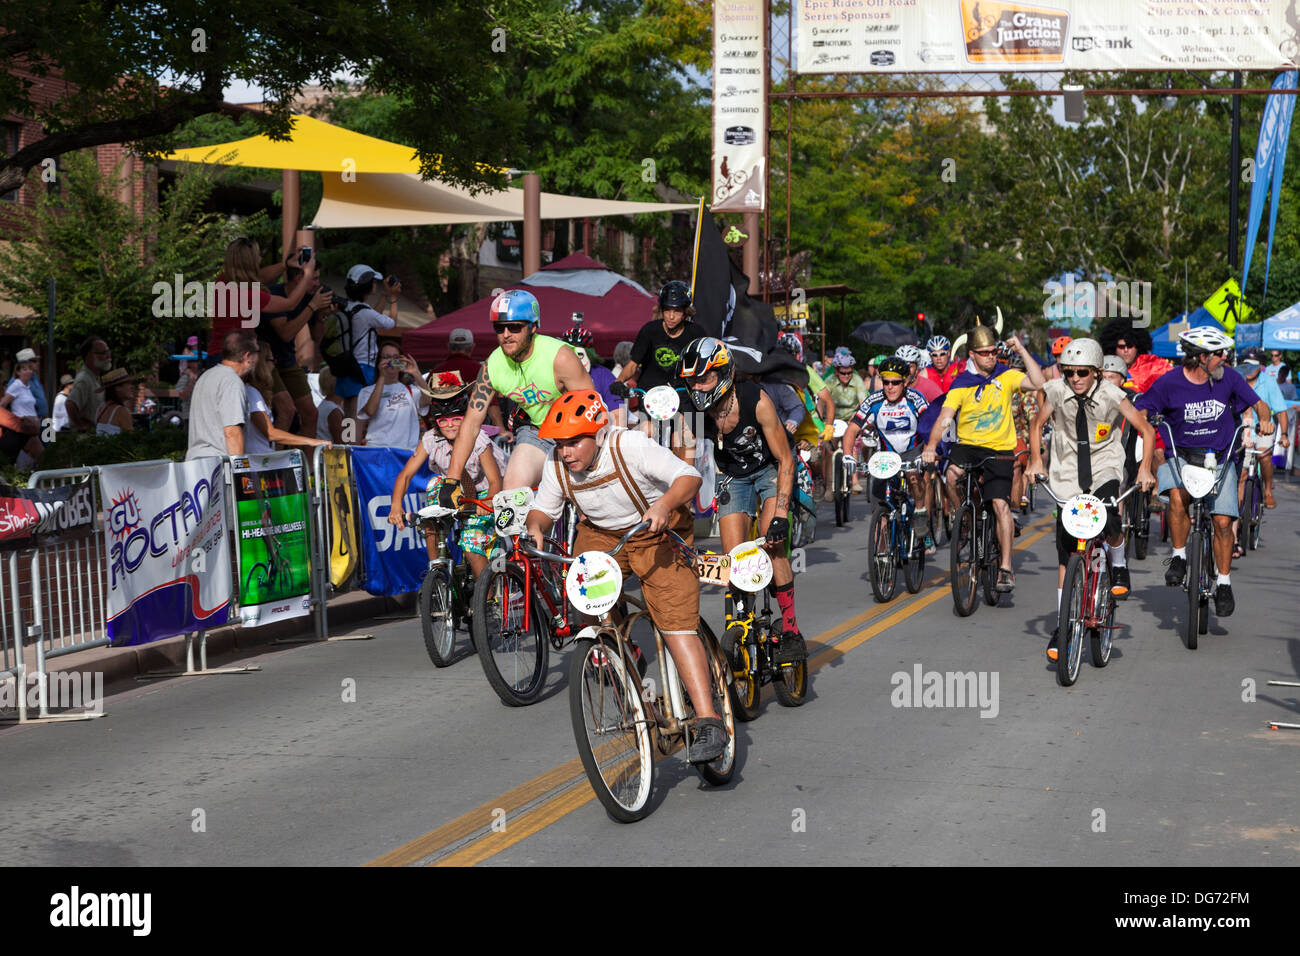 Cyclists in fancy dress taking part in the annual Charity cycle race, Grand Junction, Colorado, USA Stock Photo